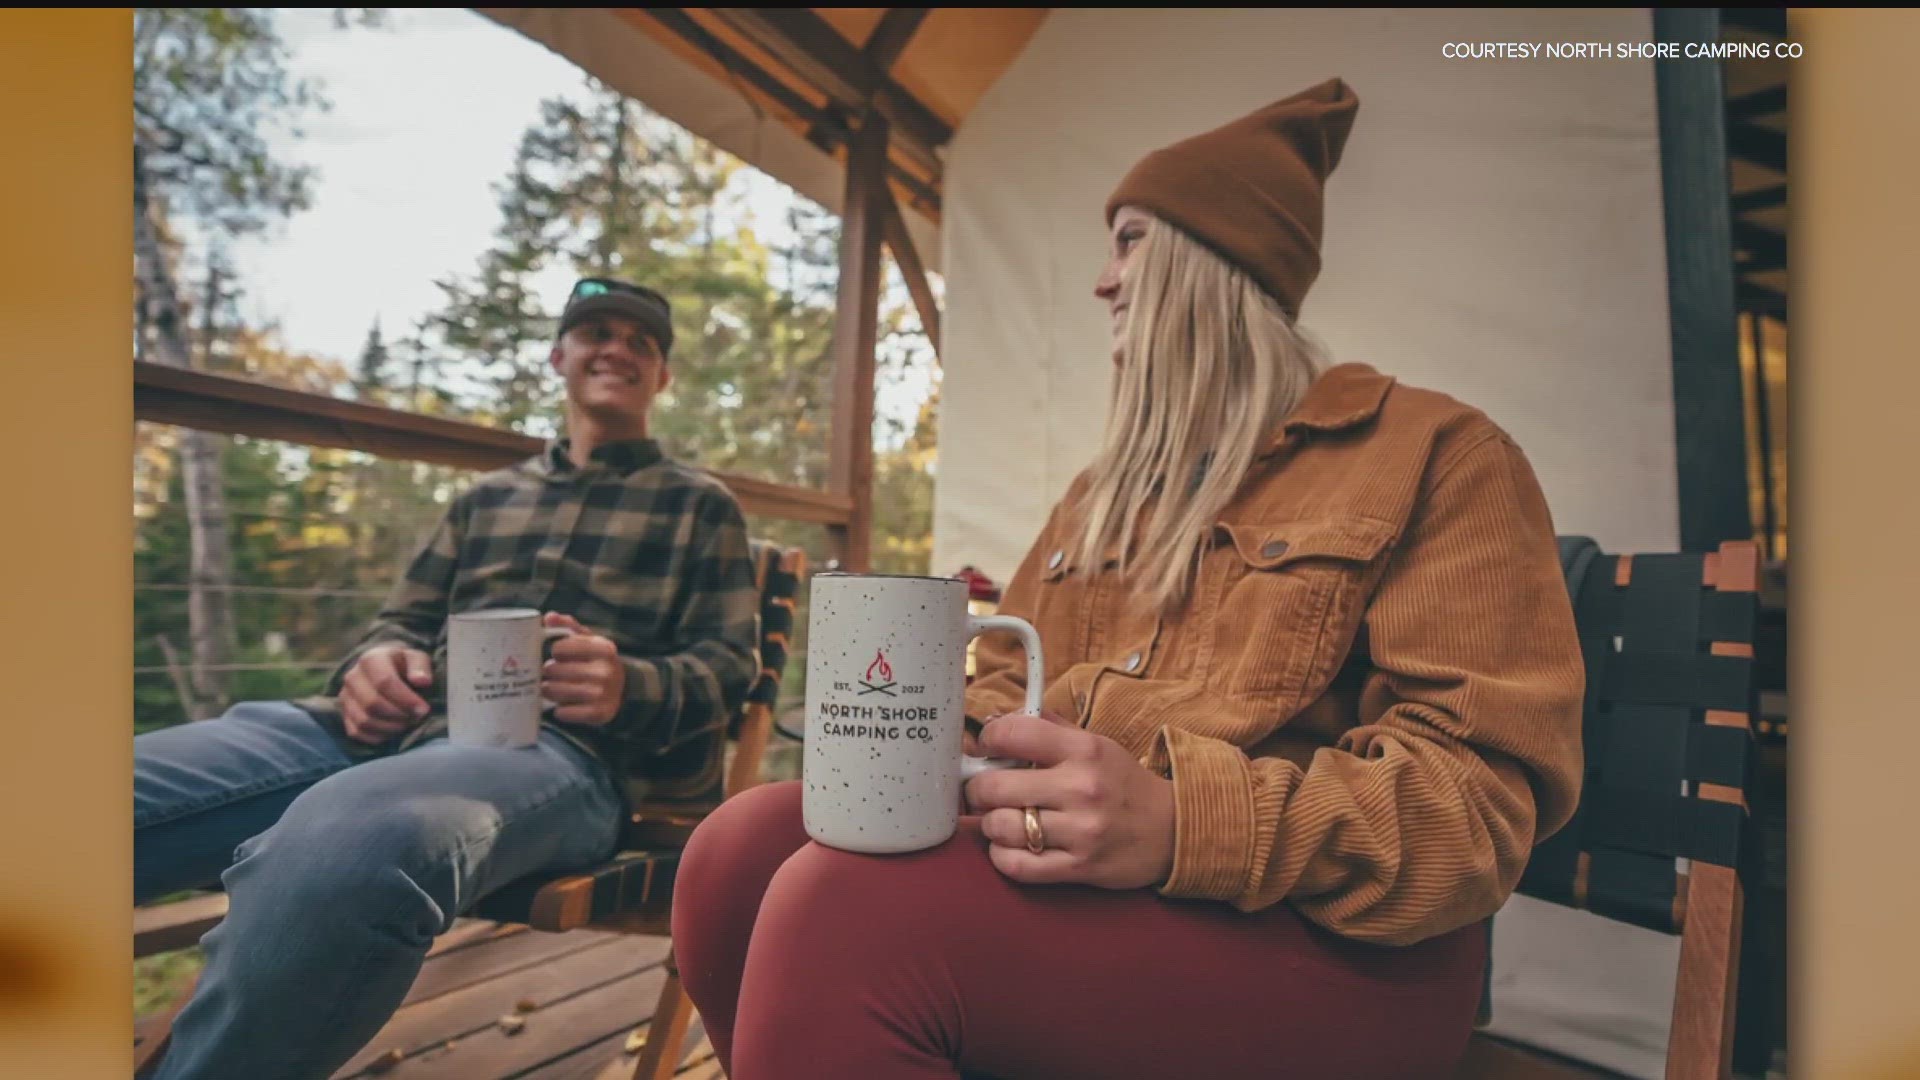 North Shore Camping Co. is an outdoor-focused resort that embraces the Scandinavian open-air living concept in Beaver Bay.